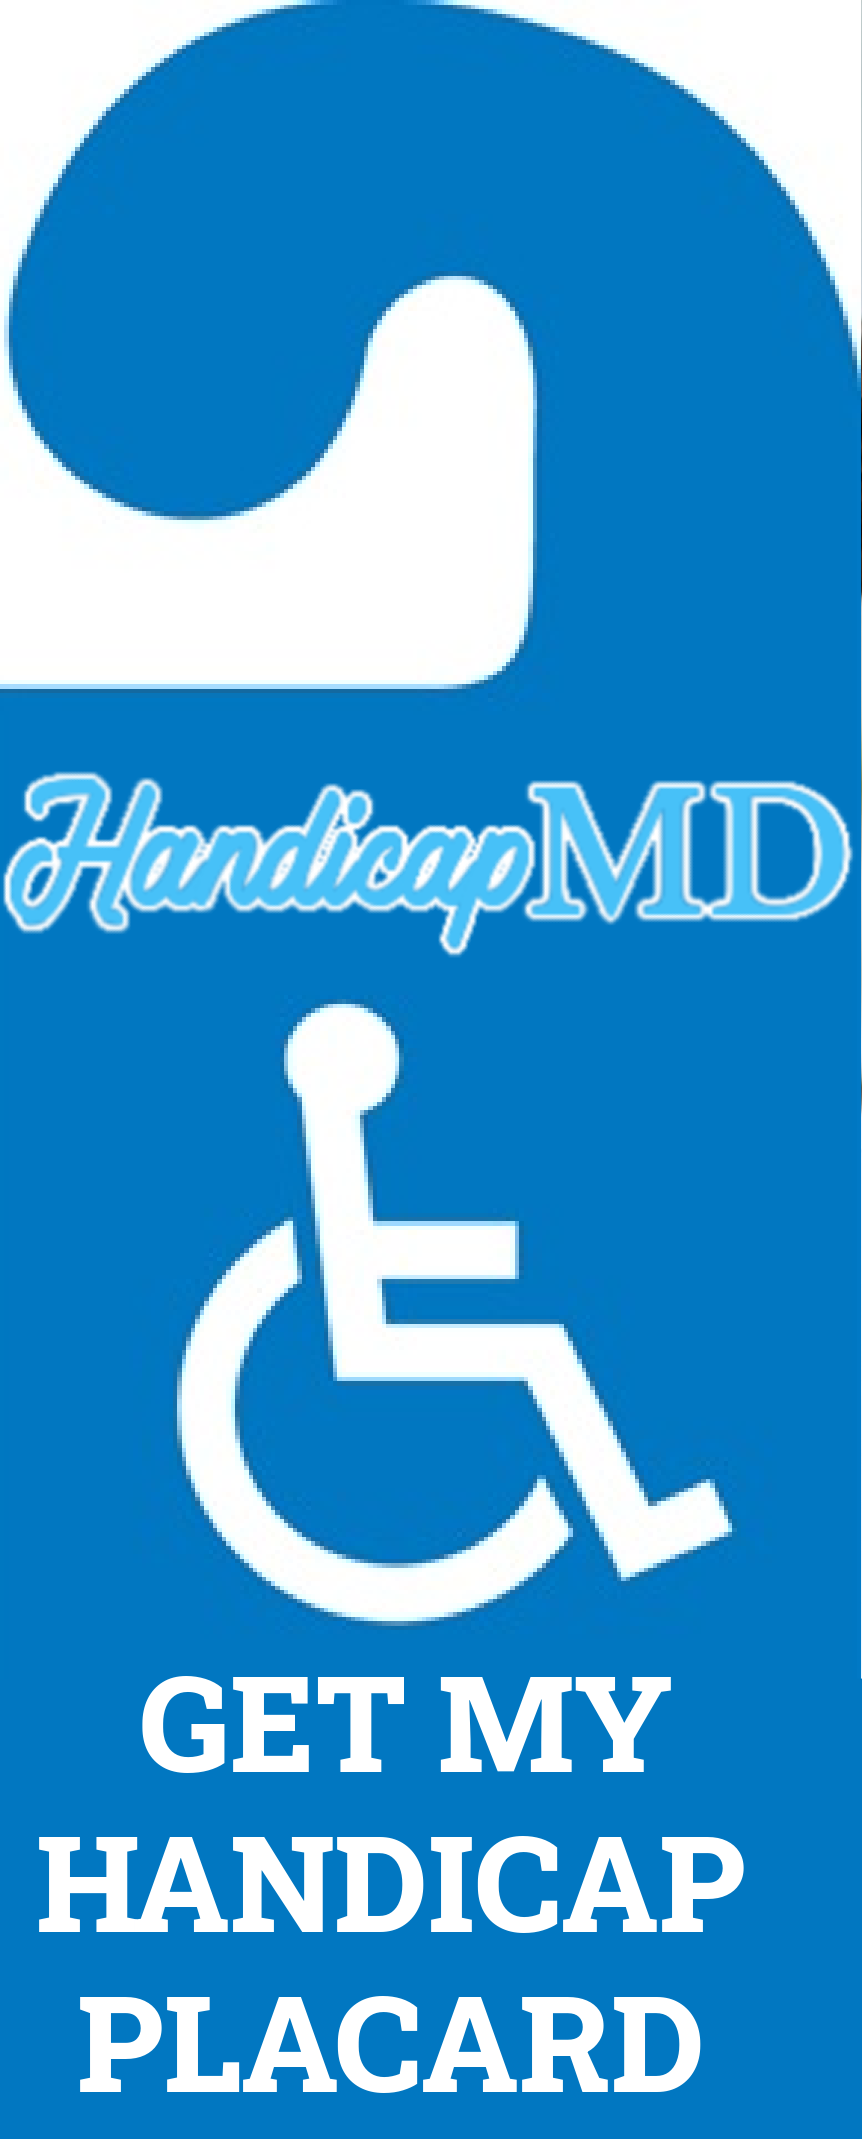 How to Get a Handicap Parking Placard In 2021